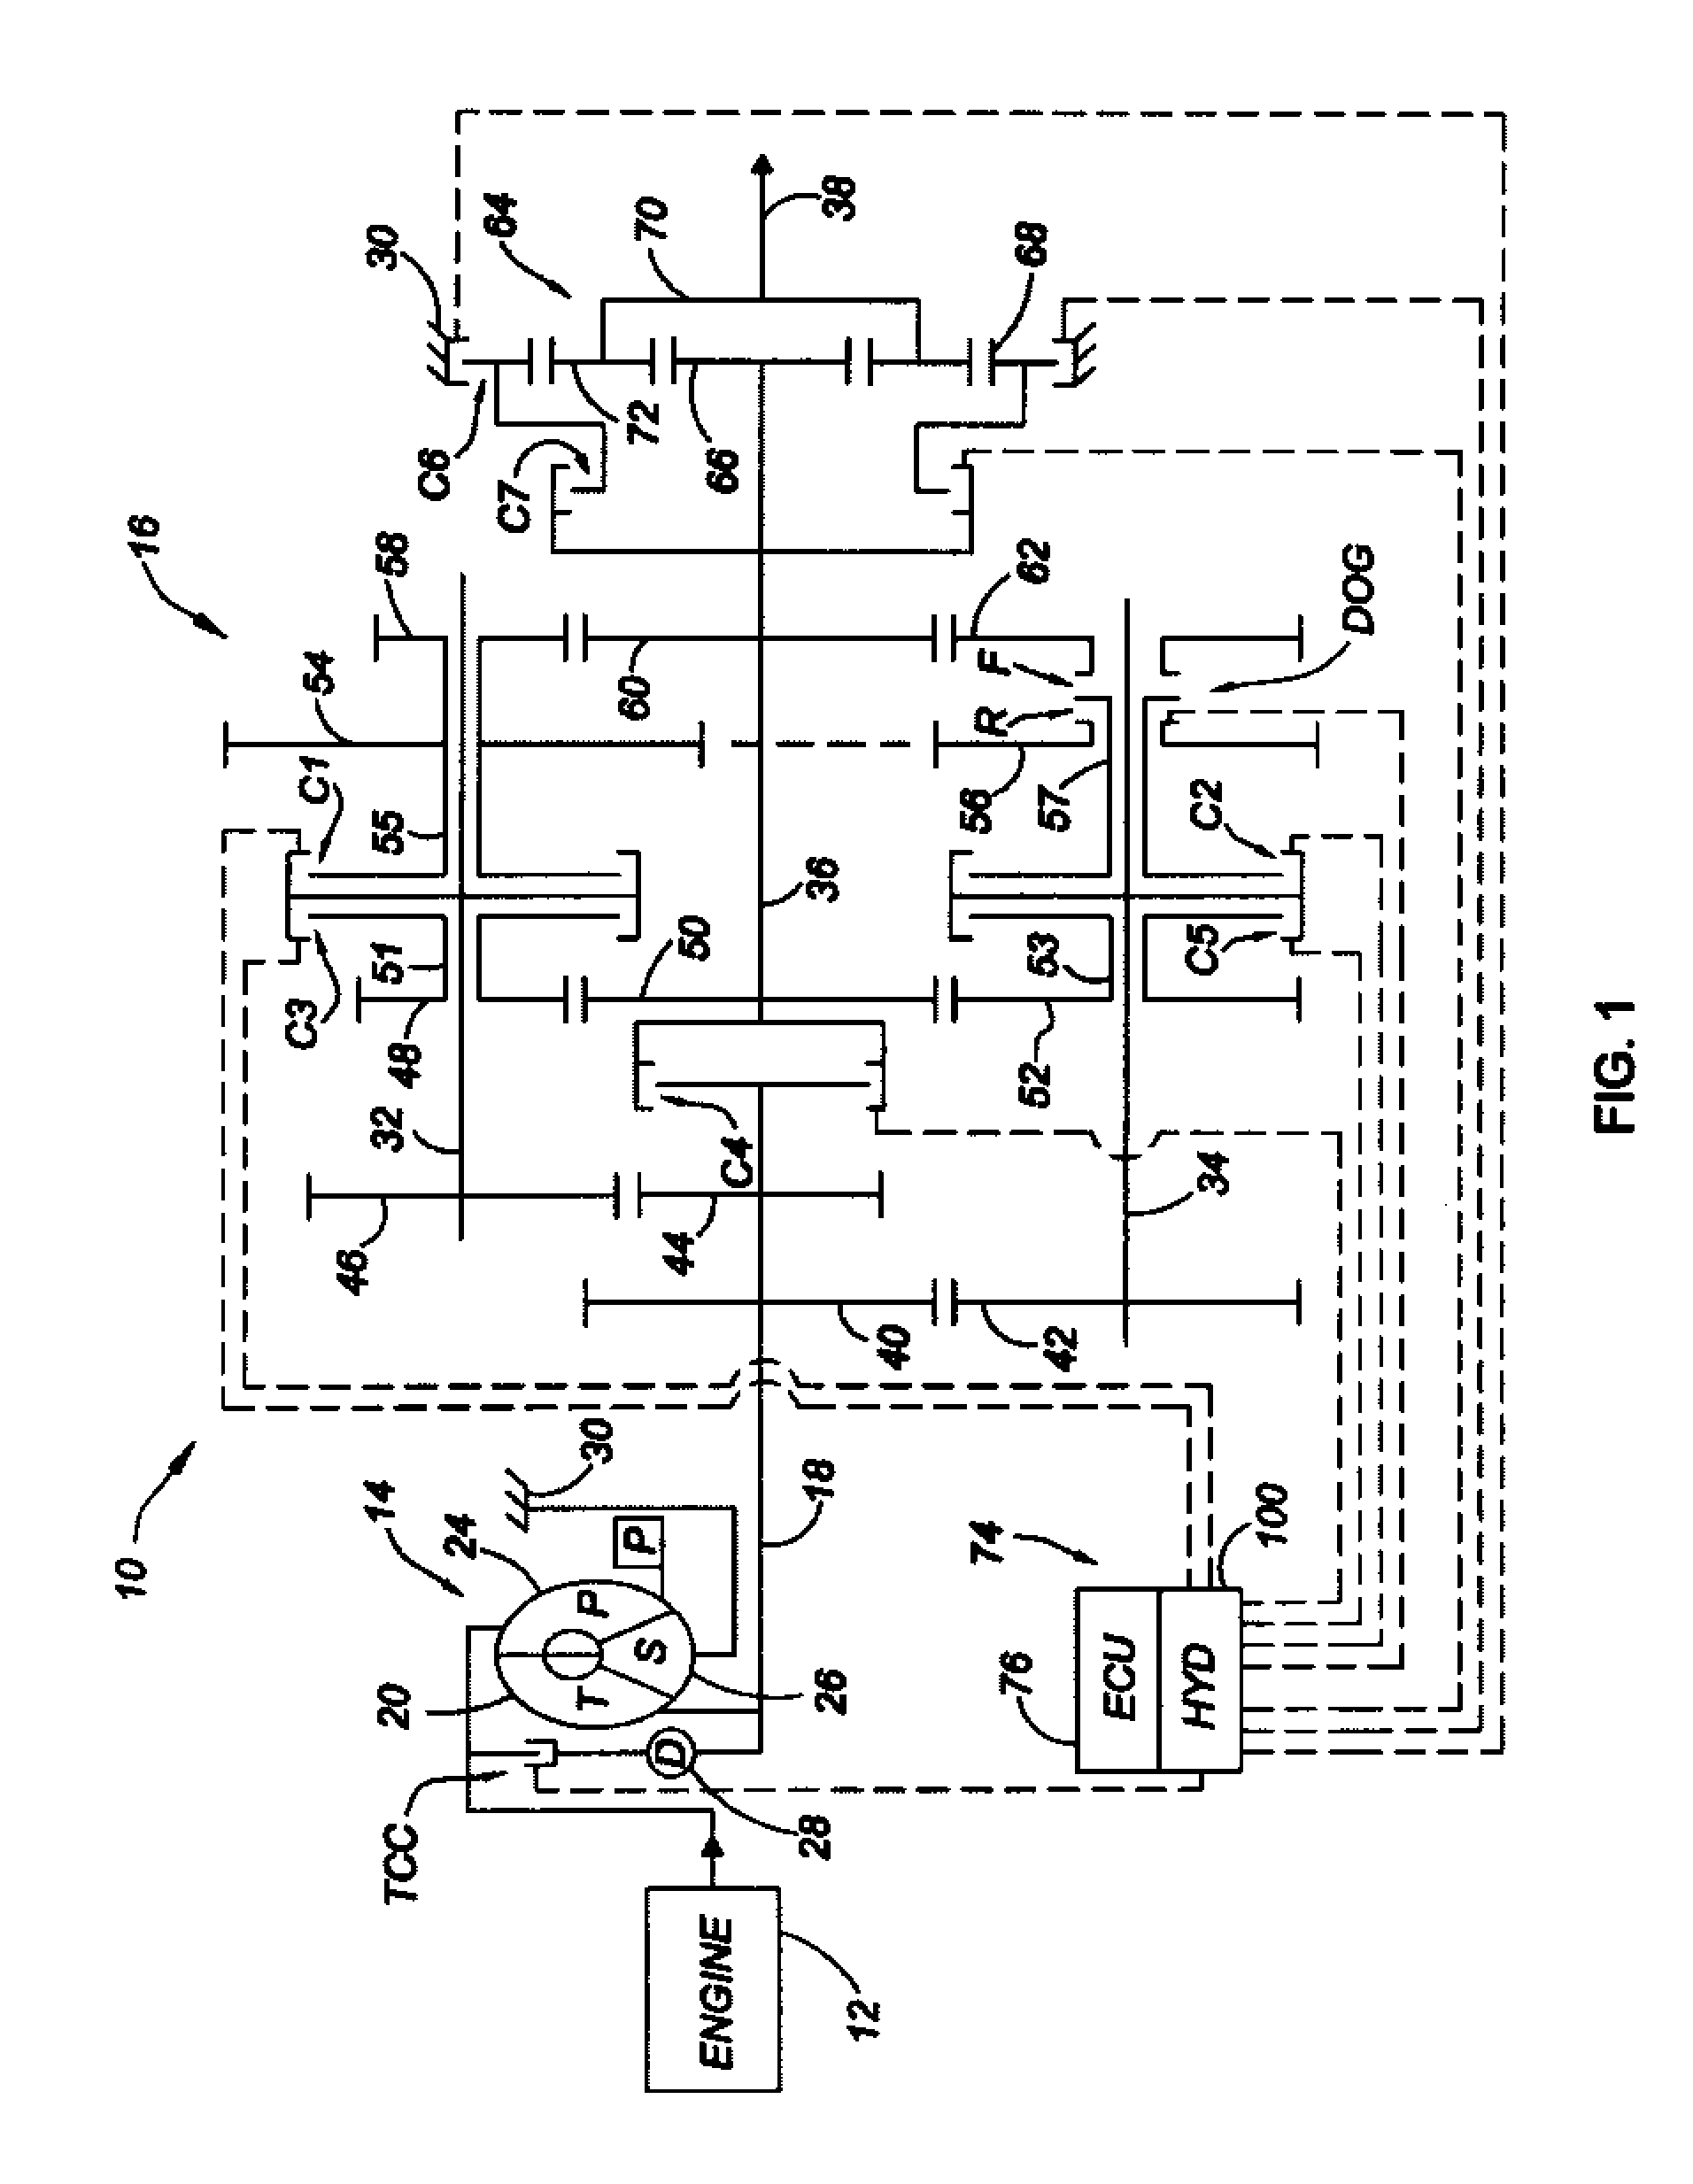 Electro-hydraulic control system with three-position dog clutch actuator valve